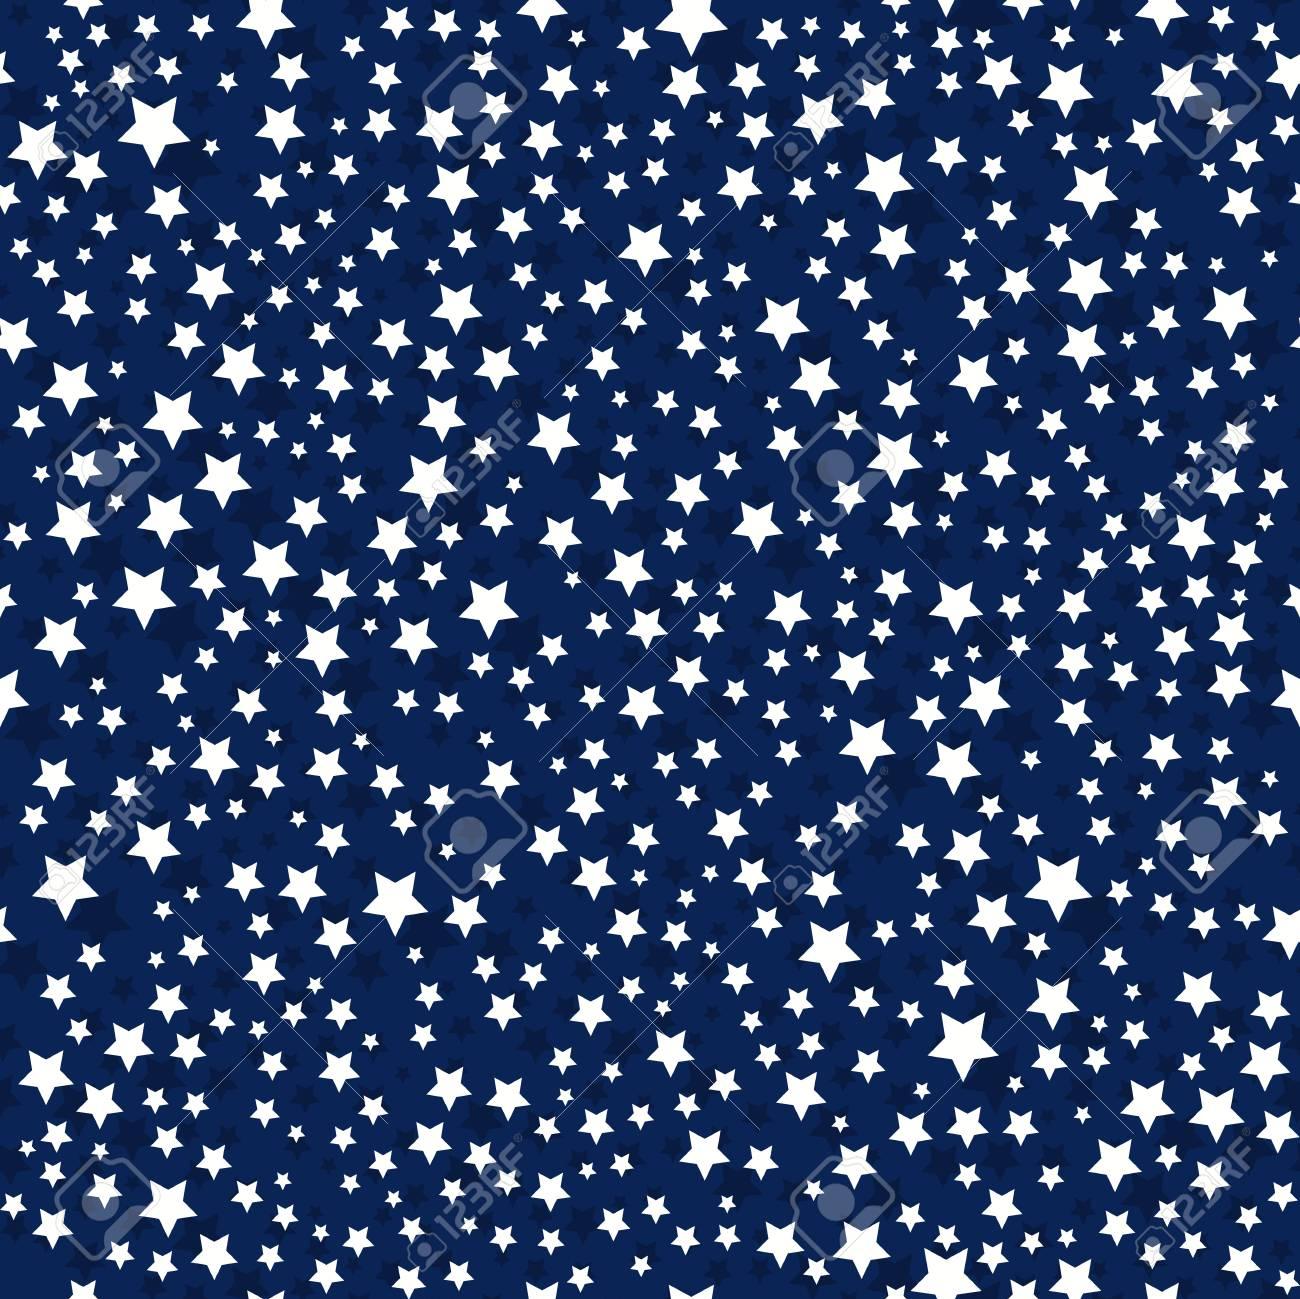 Abstract Seamless Astronomy Wallpaper With Shiny Stars On The